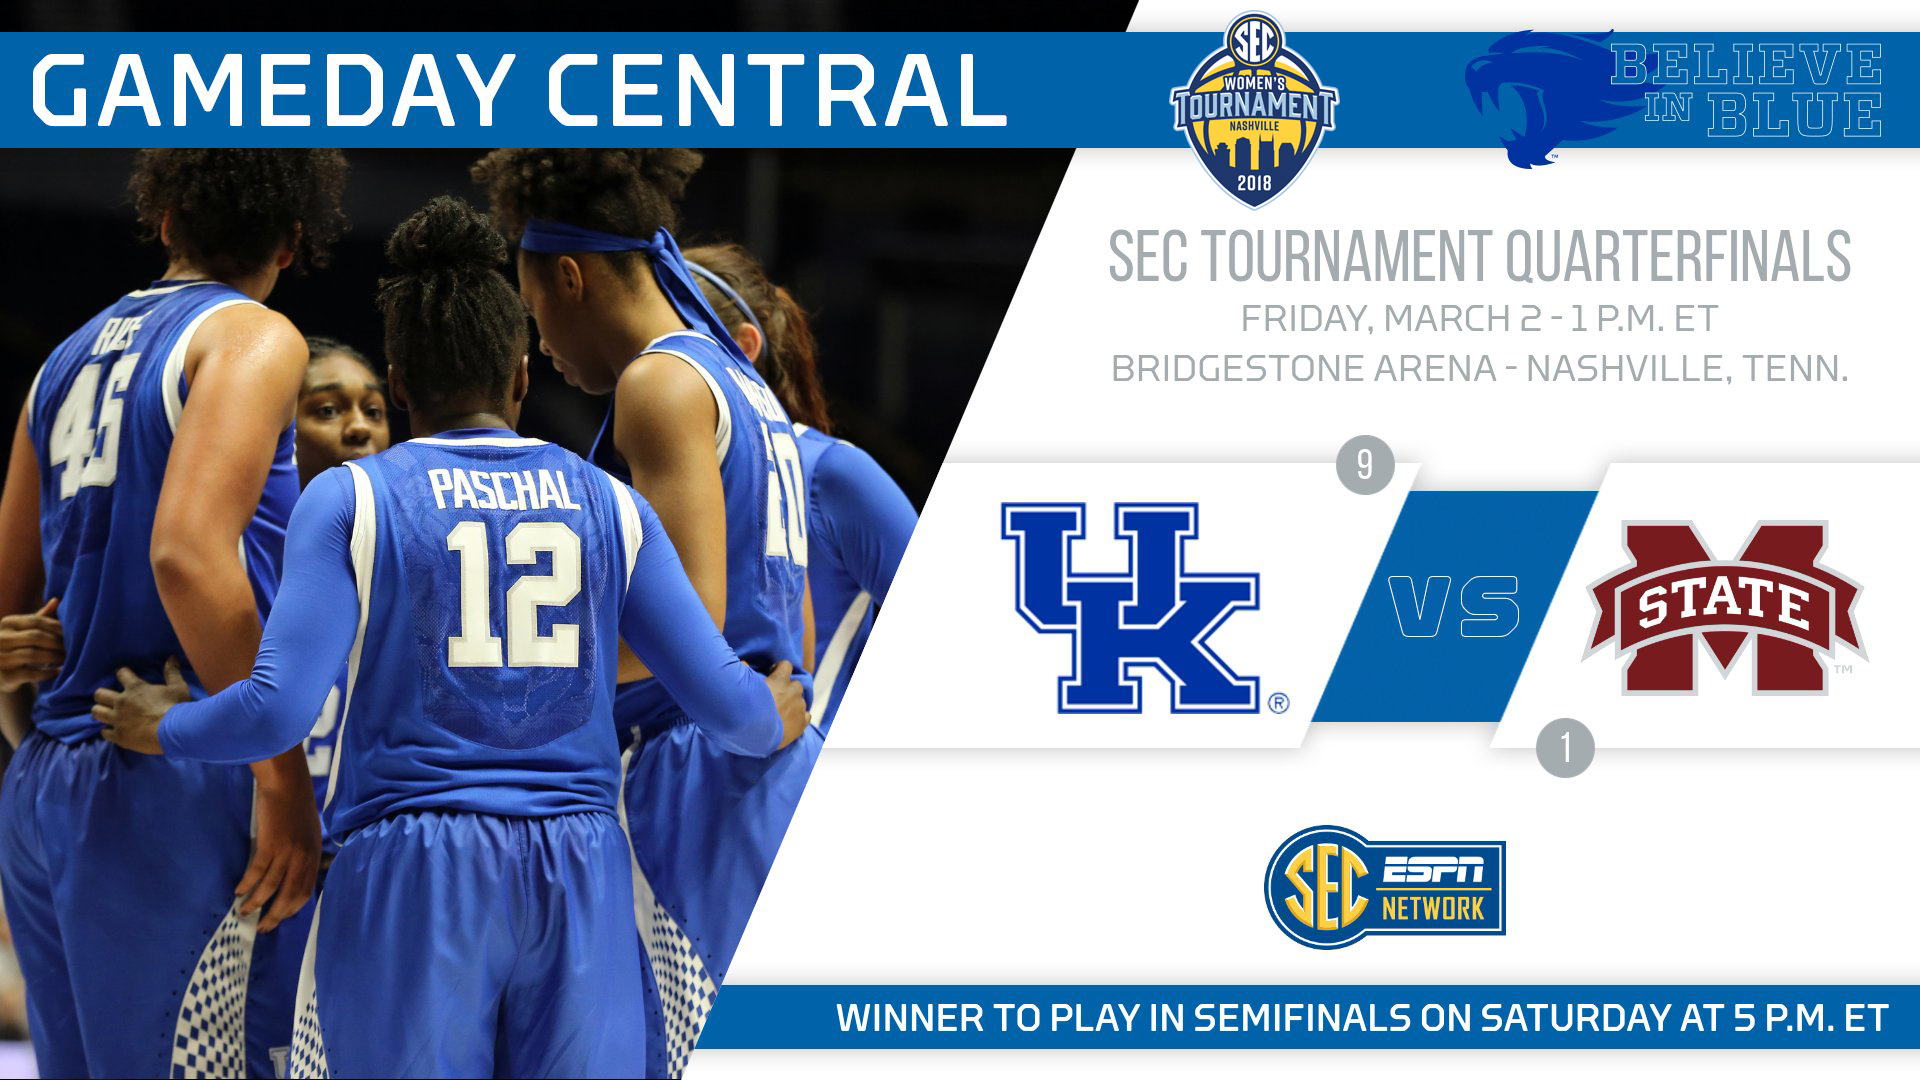 Kentucky Plays Top Seed Mississippi State in Quarterfinals Friday